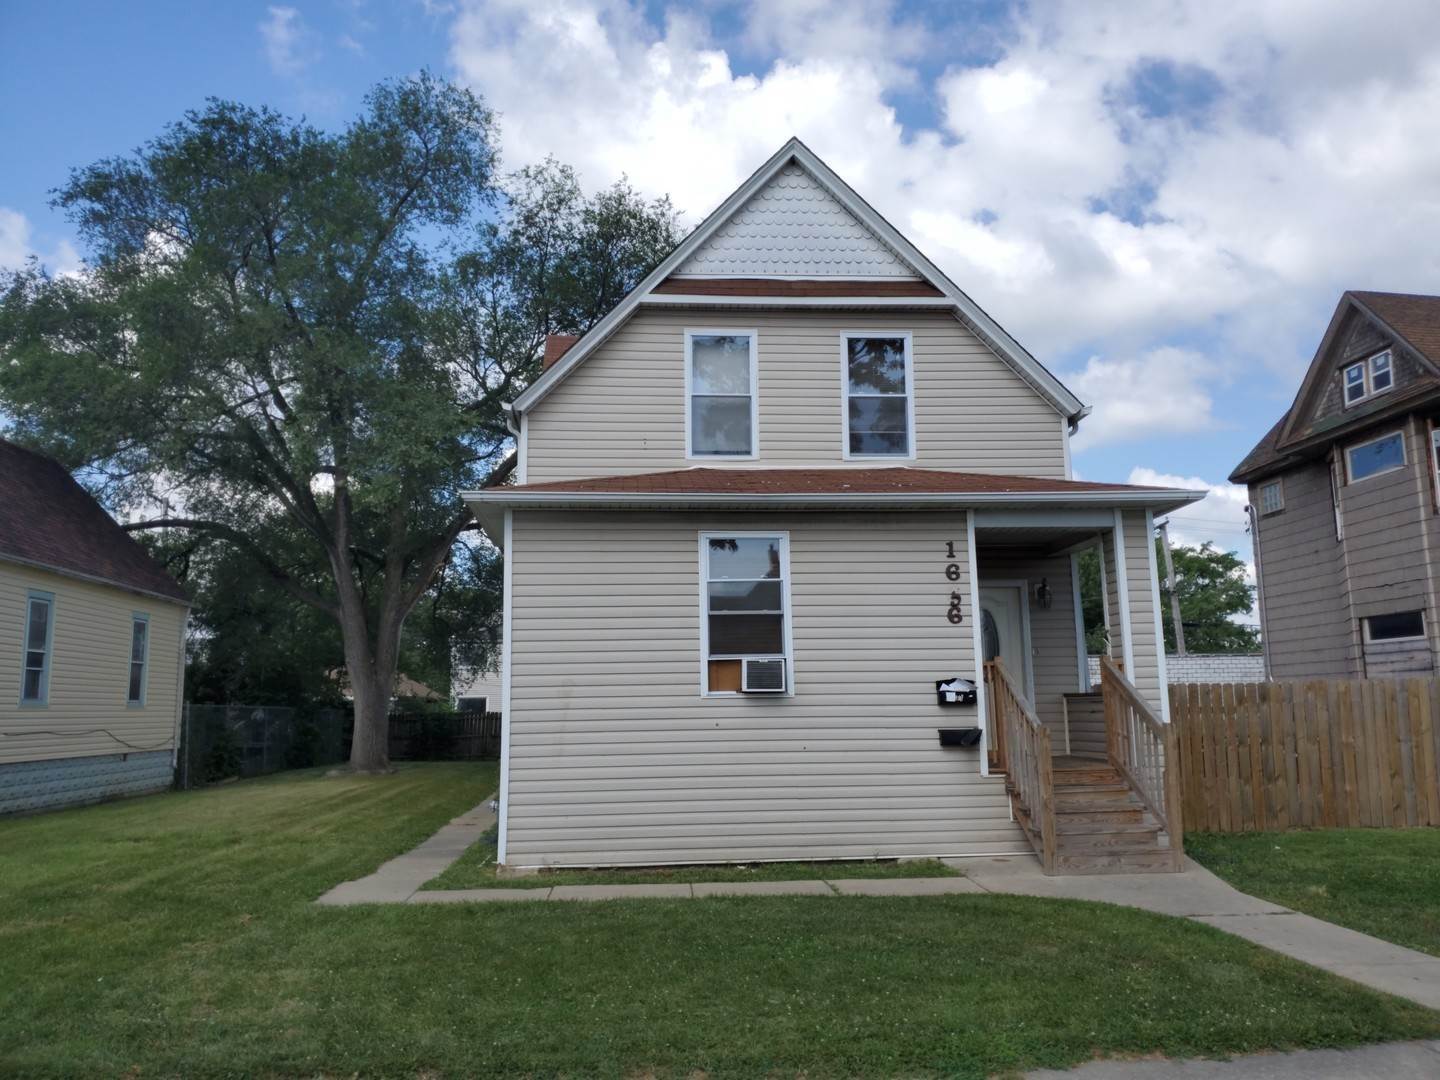 Single Family at Chicago Heights, IL 60411